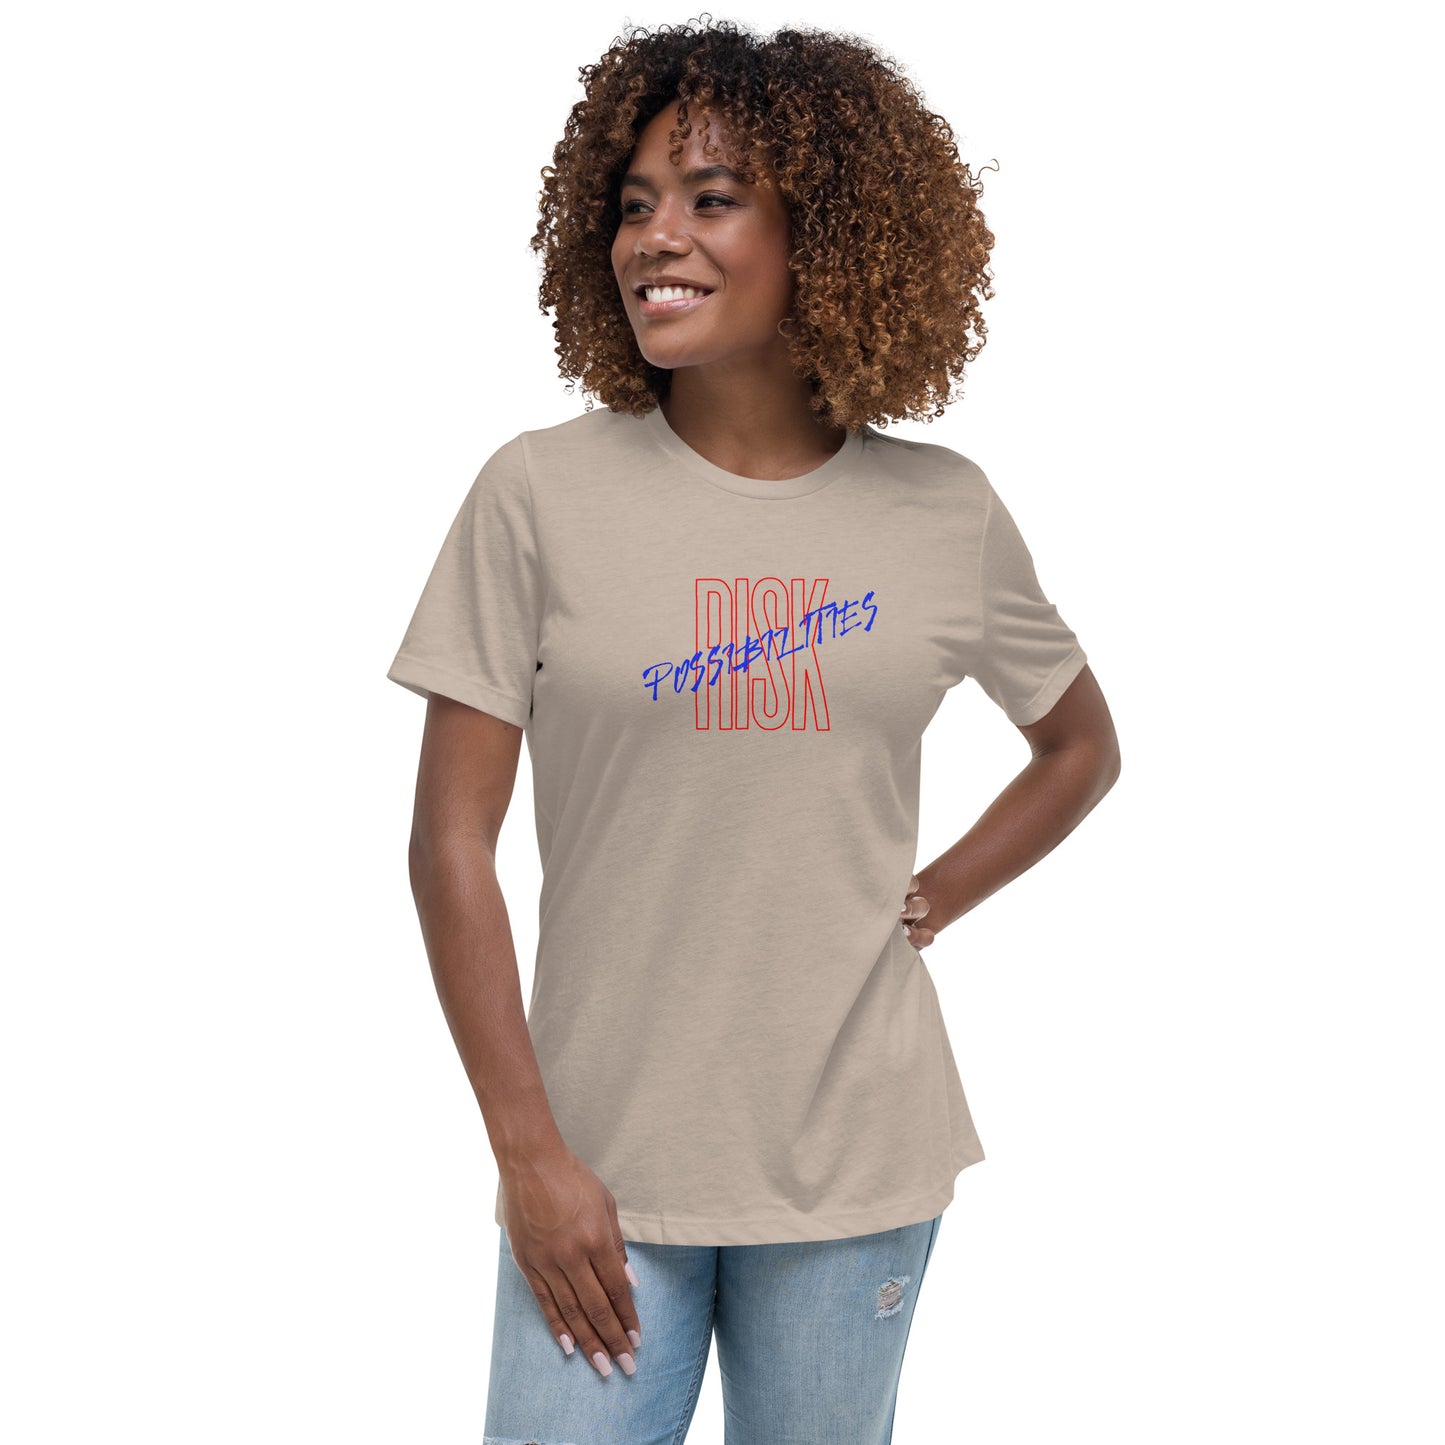 Risk / Possibilities Women's Relaxed T-Shirt